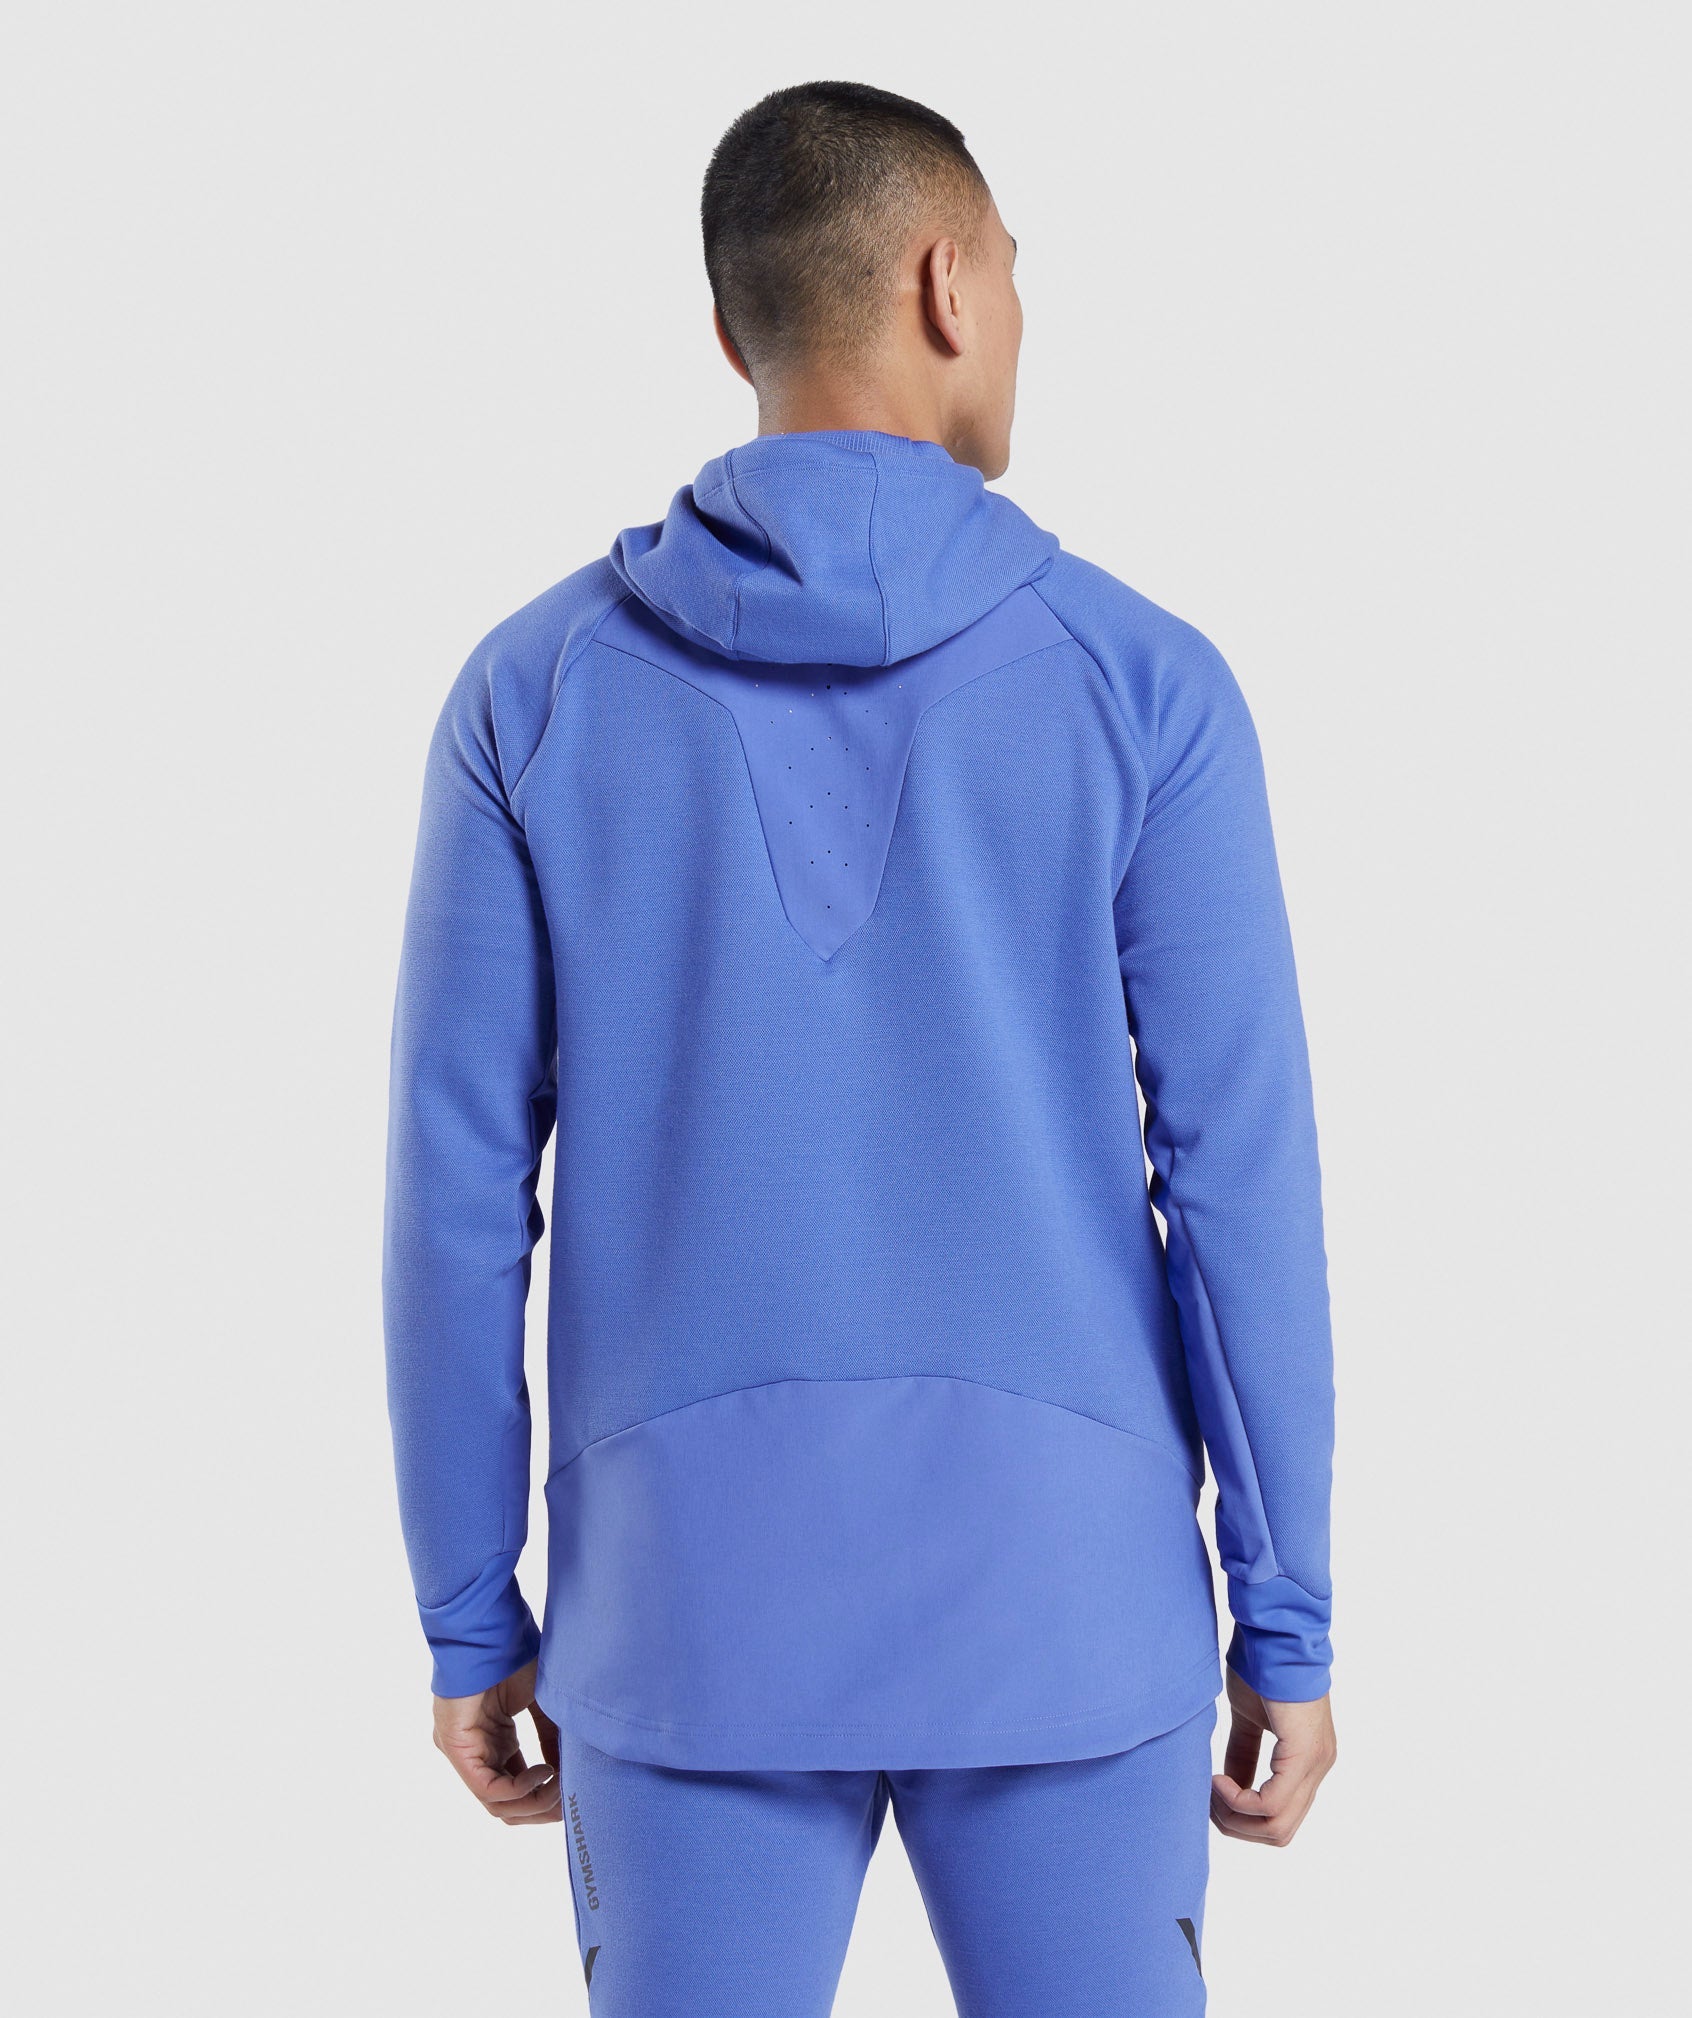 Apex Technical Jacket in Court Blue - view 2